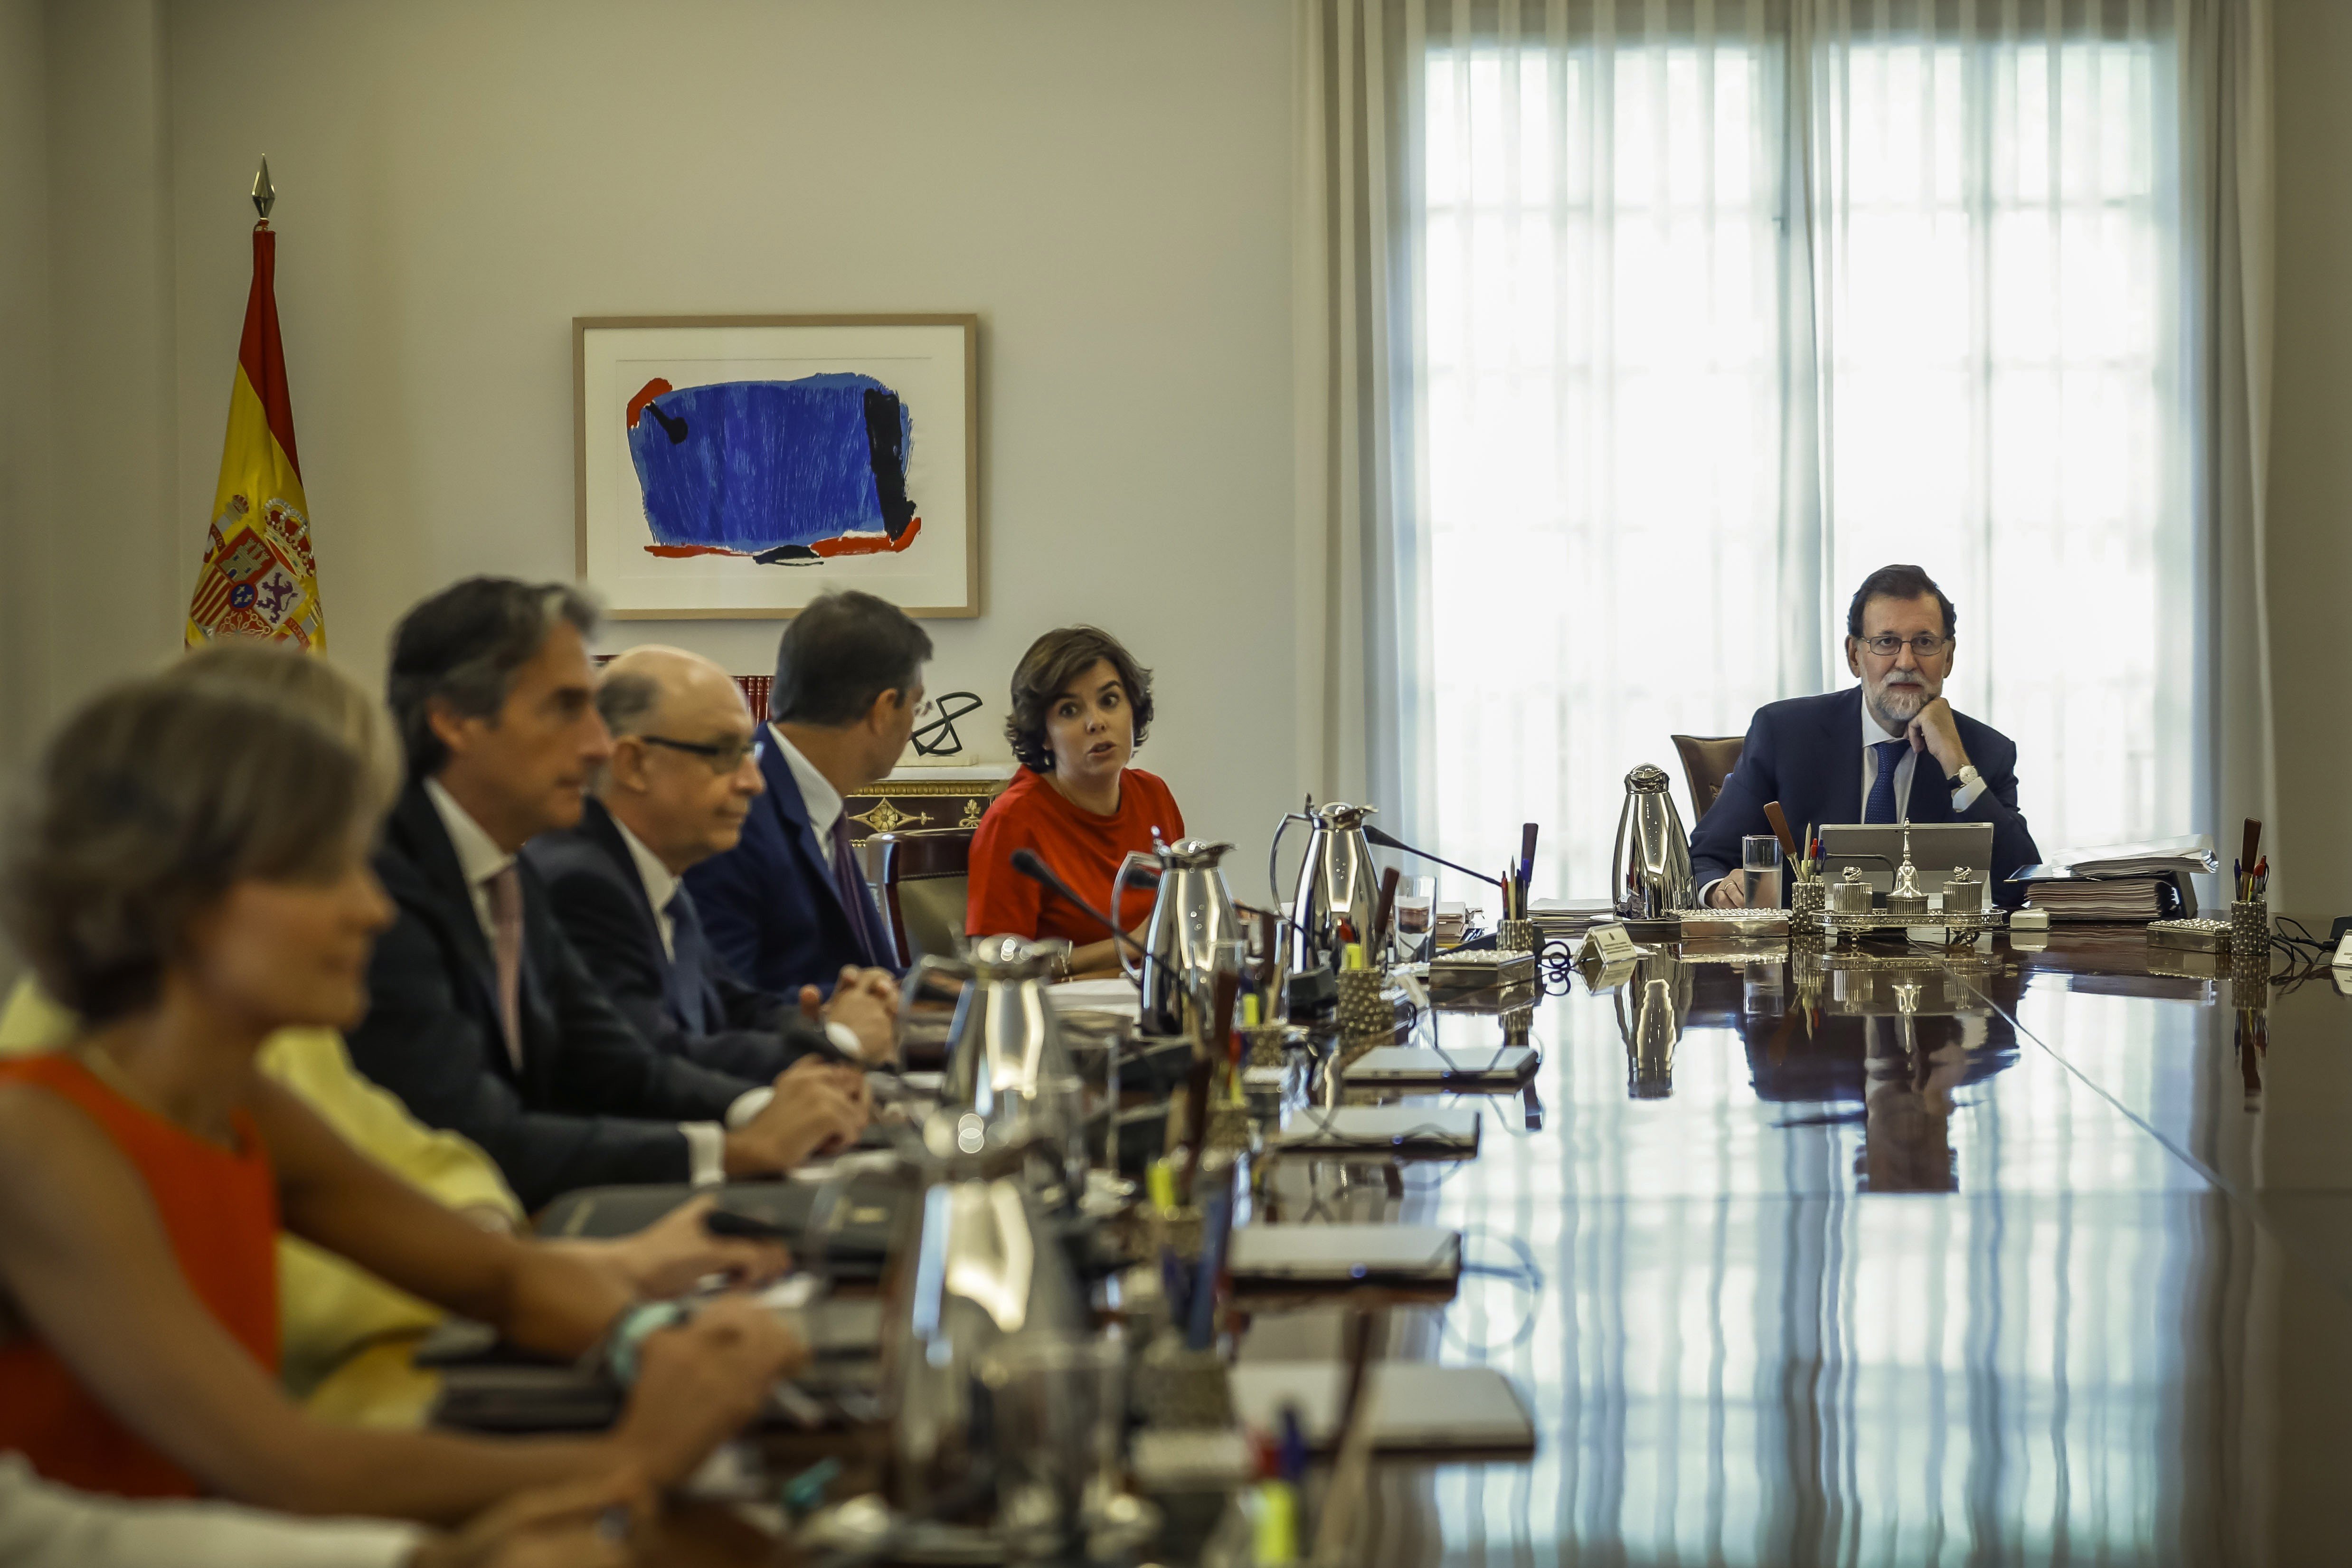 Spanish Prime Minister Rajoy appeals referendum to Constitutional Court, threatens mayors